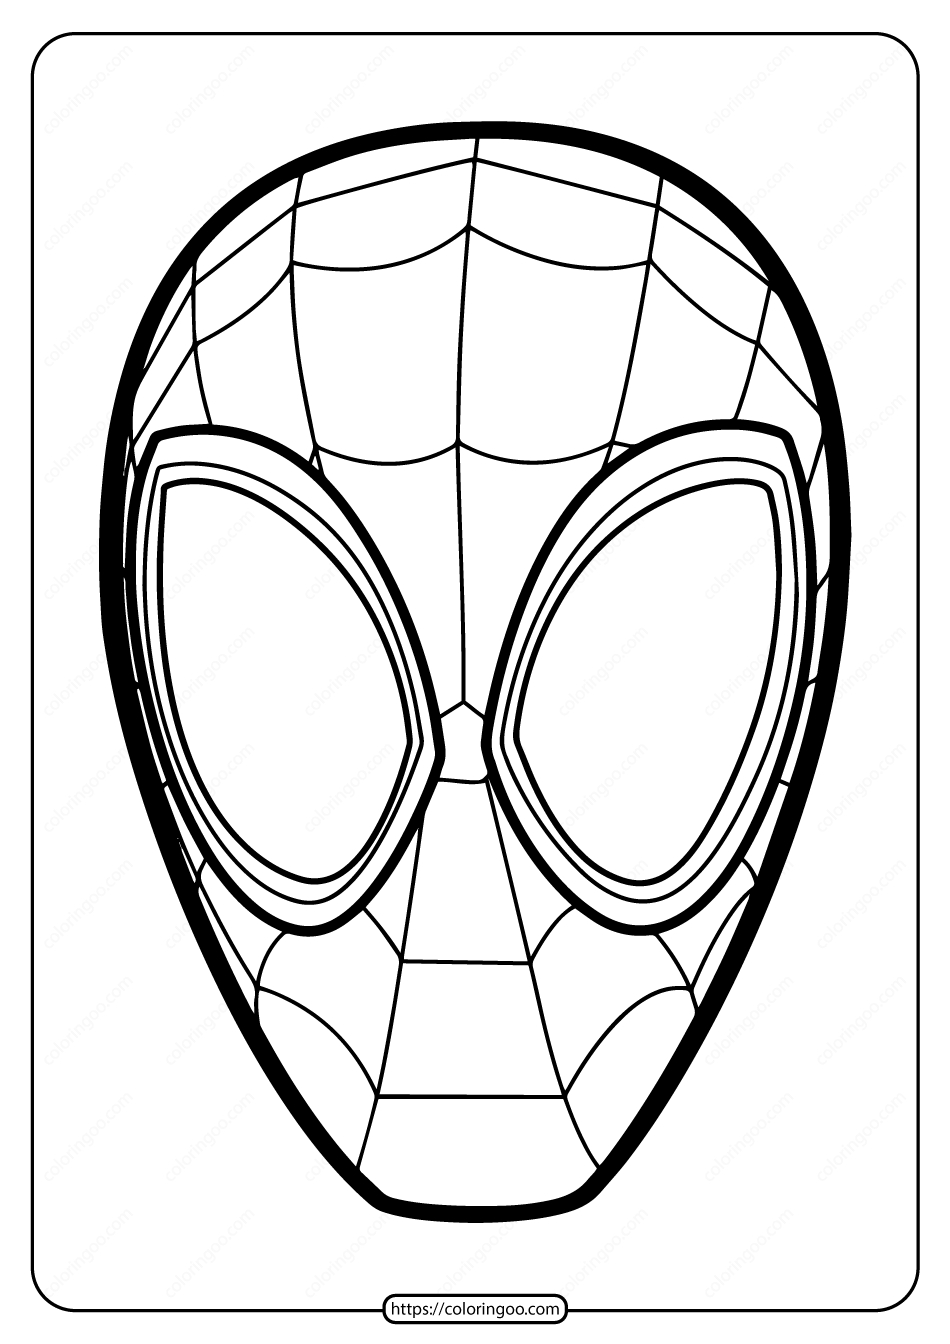 Free Printable Spiderman Mask Pdf Coloring Page pour Coloriage Masque Spiderman